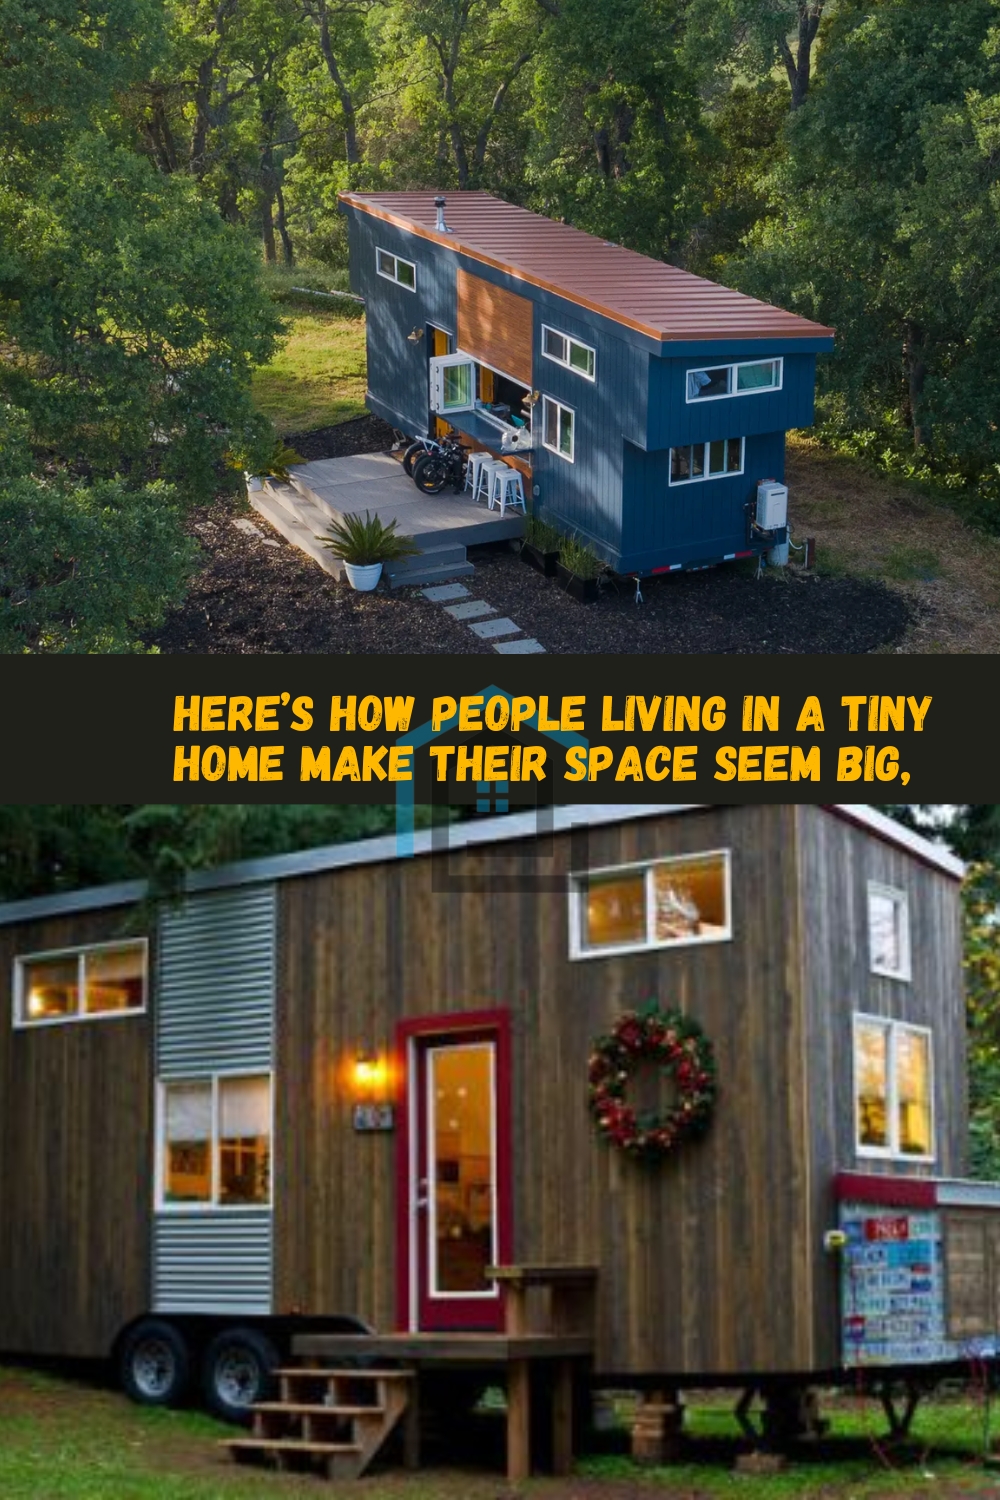 Here’s how people living in a tiny home make their space seem big, according to those who designed their houses themselves pin